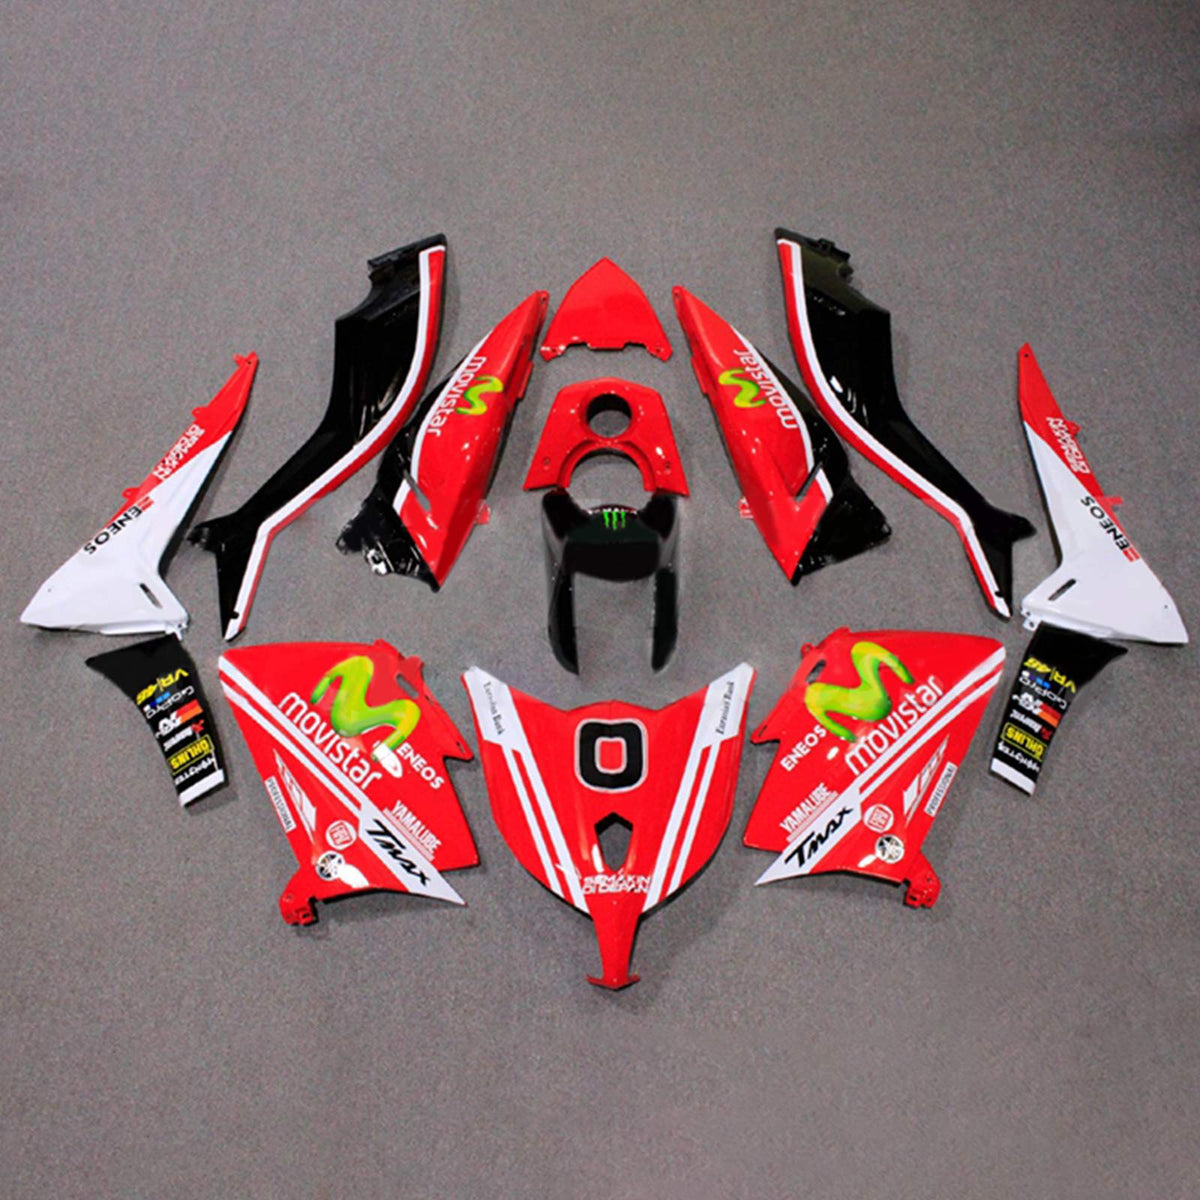 Amotopart 2012-2014 T-Max TMAX530 Yamaha Red&White Style2 Fairing Kit